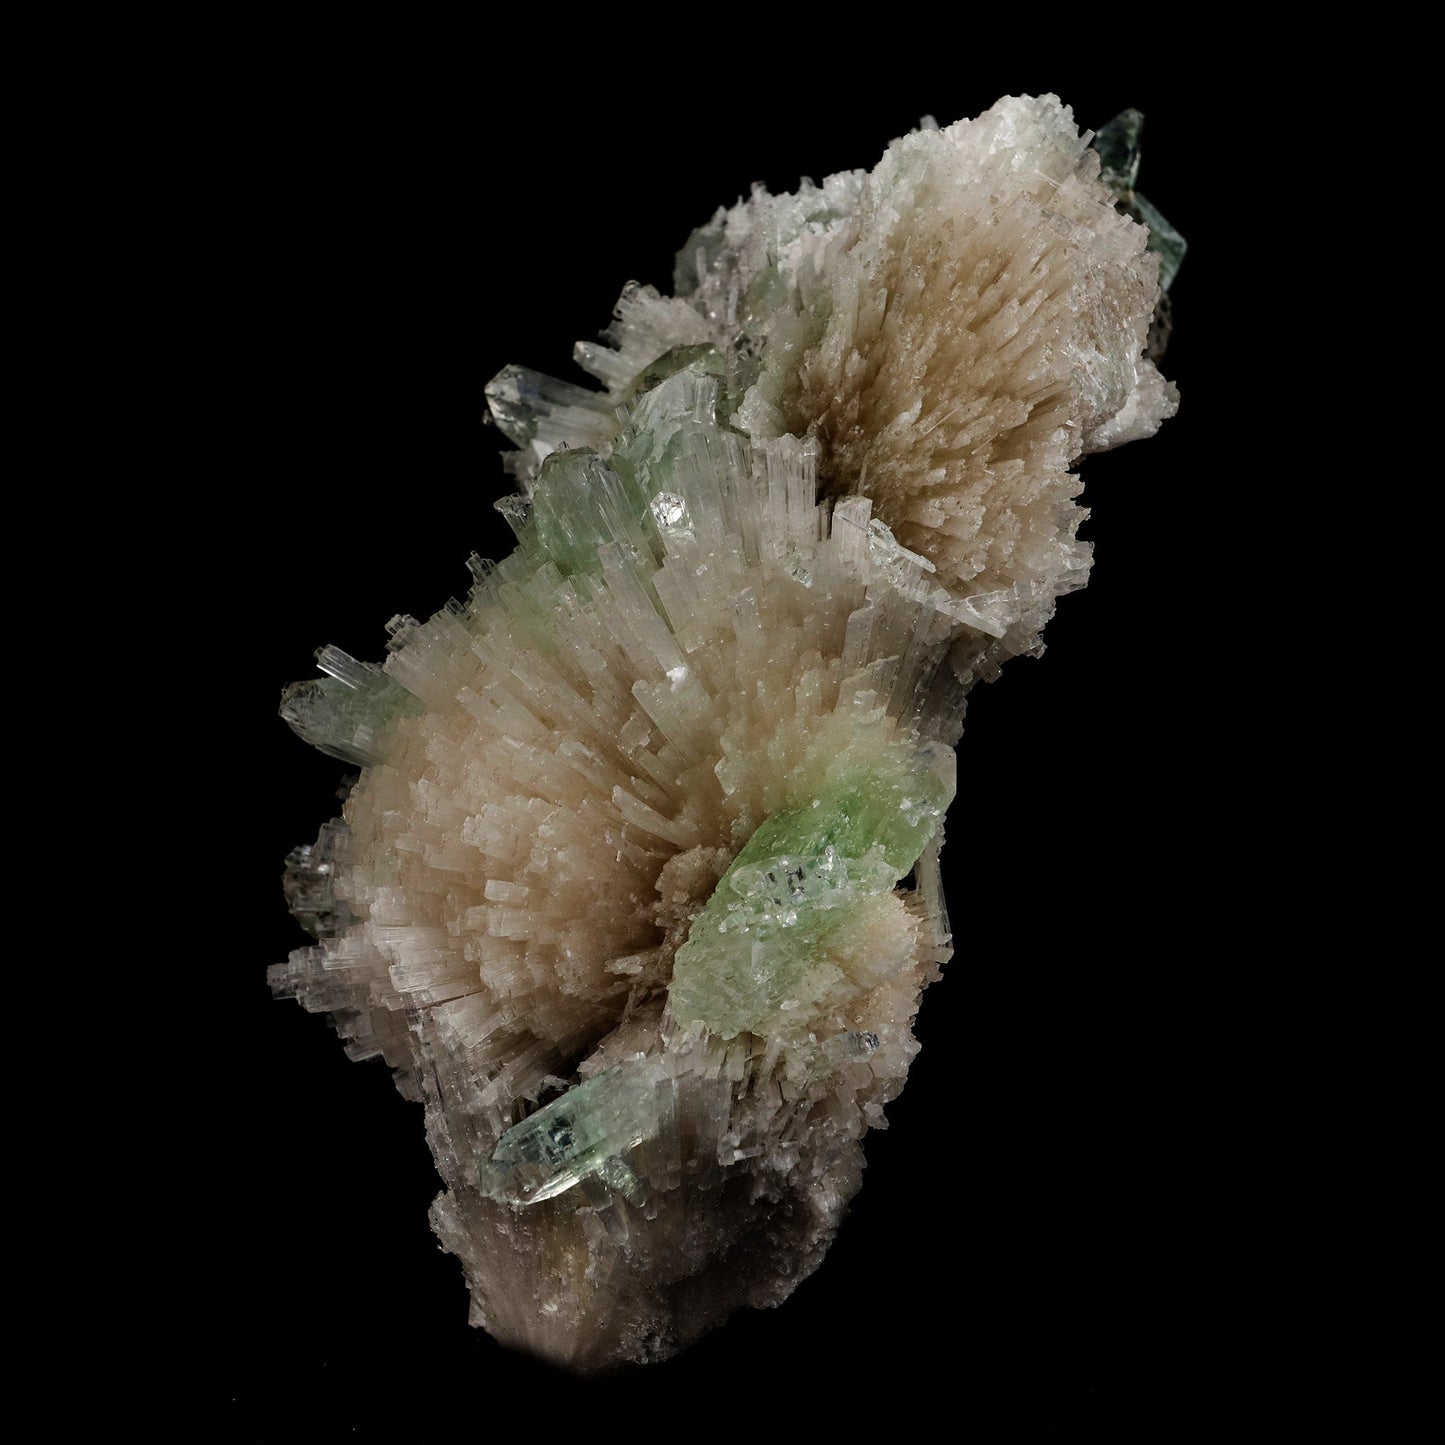 Scolecite Sprays with Green Apophyllite Natural Mineral Specimen # B …  https://www.superbminerals.us/products/scolecite-sprays-with-green-apophyllite-natural-mineral-specimen-b-5106  Features: Very rich porcupine quill spray of glassy scolecite needles is artistically set on the basalt matrix, which is covered with mint-green, frosted, Tetragonal Apophyllite crystals. Large combination material that is both outstanding and rare in today's market. Primary Mineral(s): Apophyllite